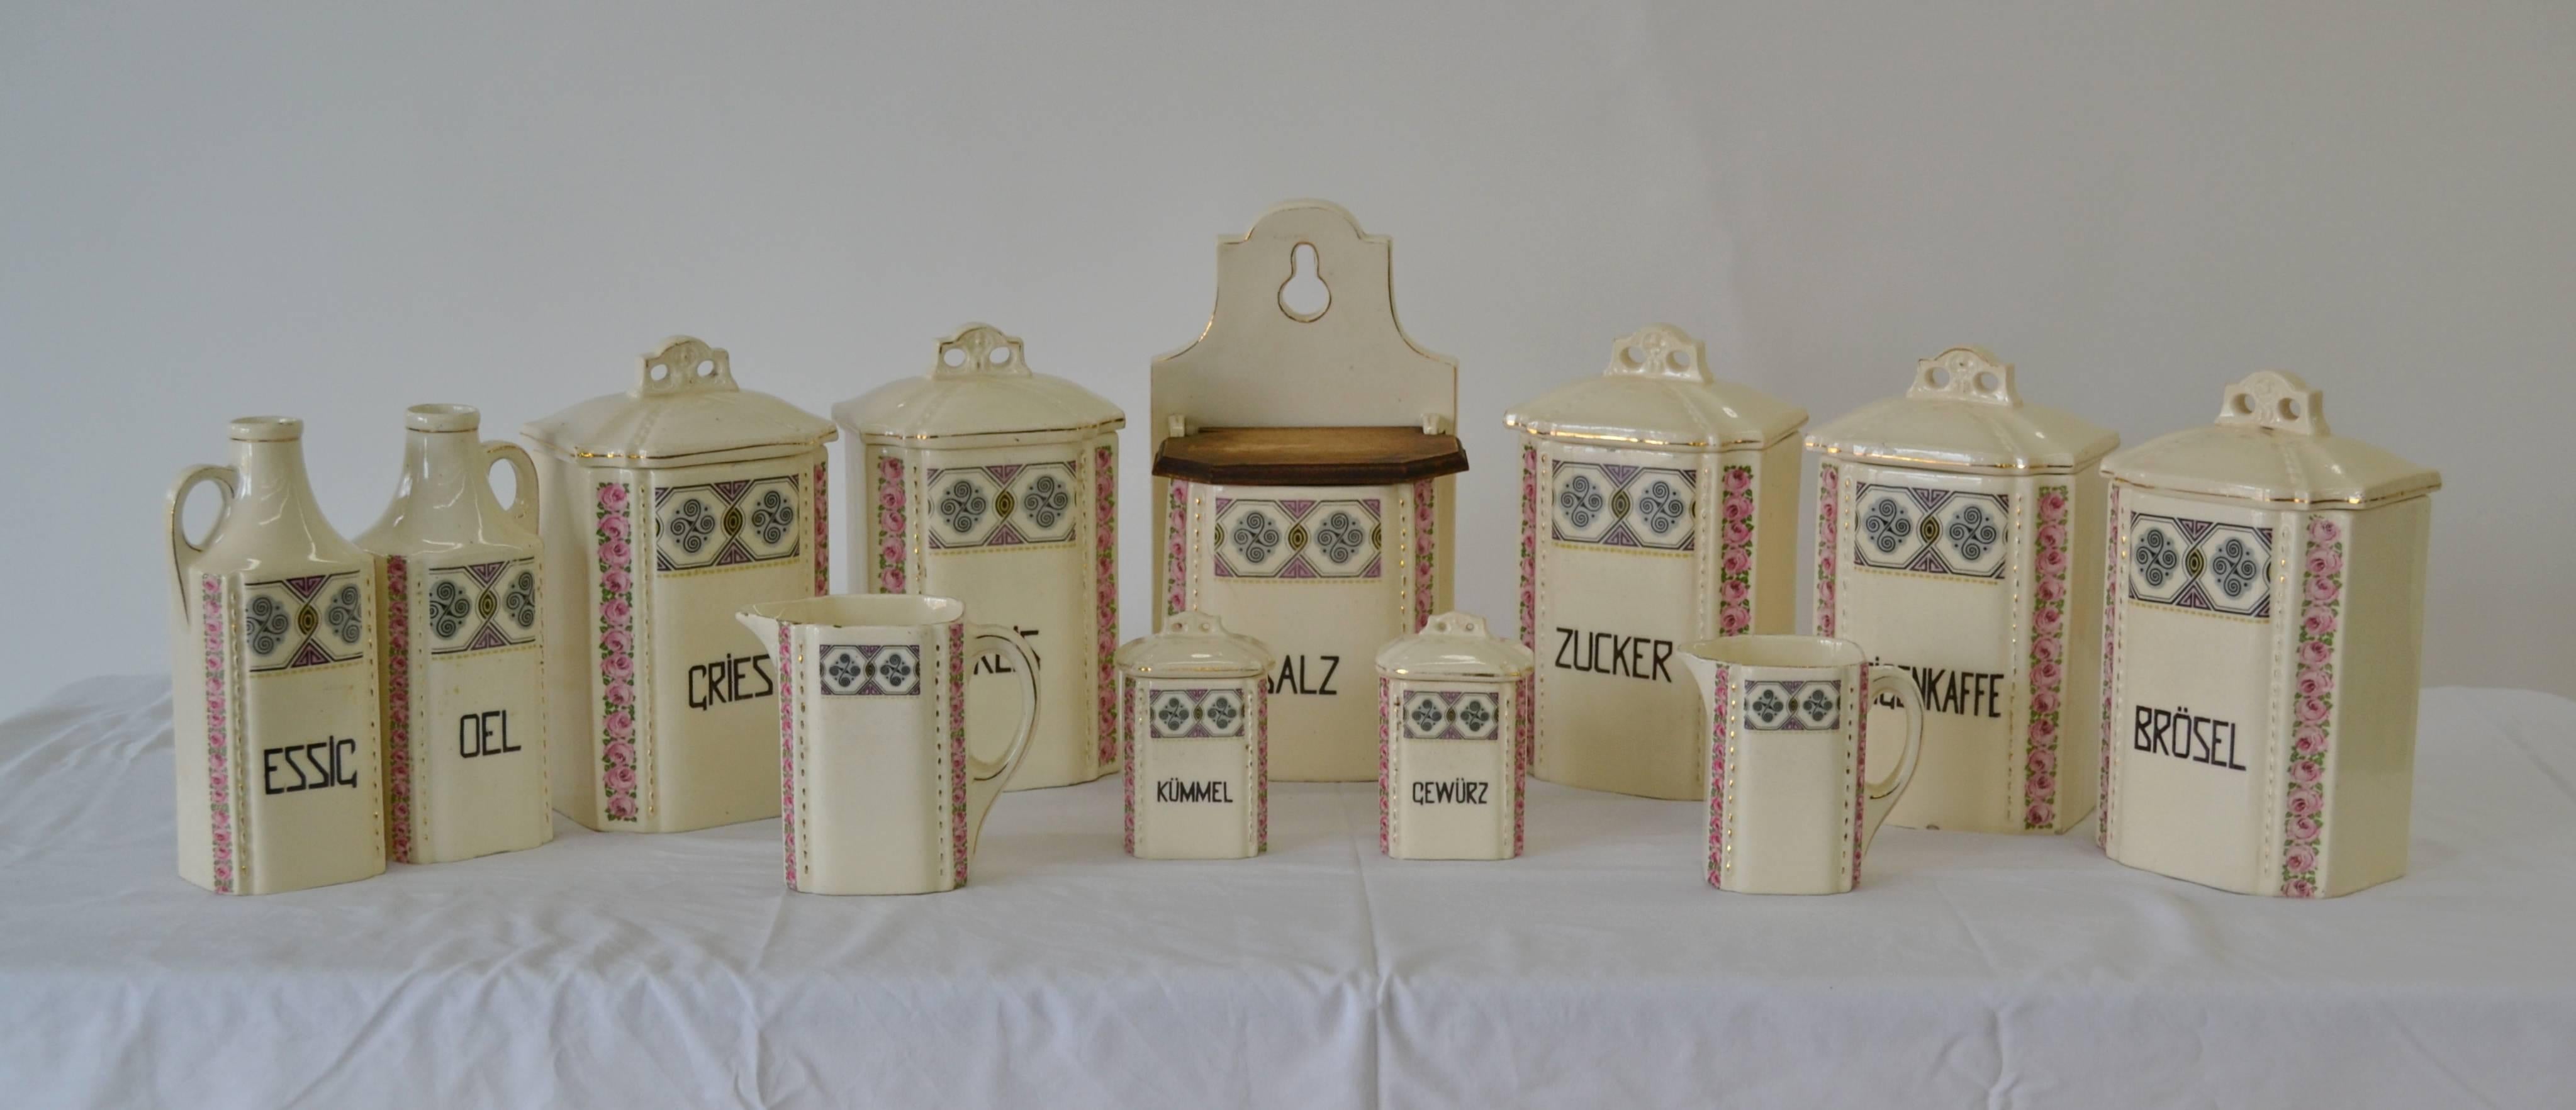 A vintage set of porcelain Art Deco kitchen canisters by Gretl of Czechoslovakia, with a geometric pattern transfer on the front and a flute of pink roses on the front corners. Comprised of 12 pieces including a hanging salt box with wooden lid and